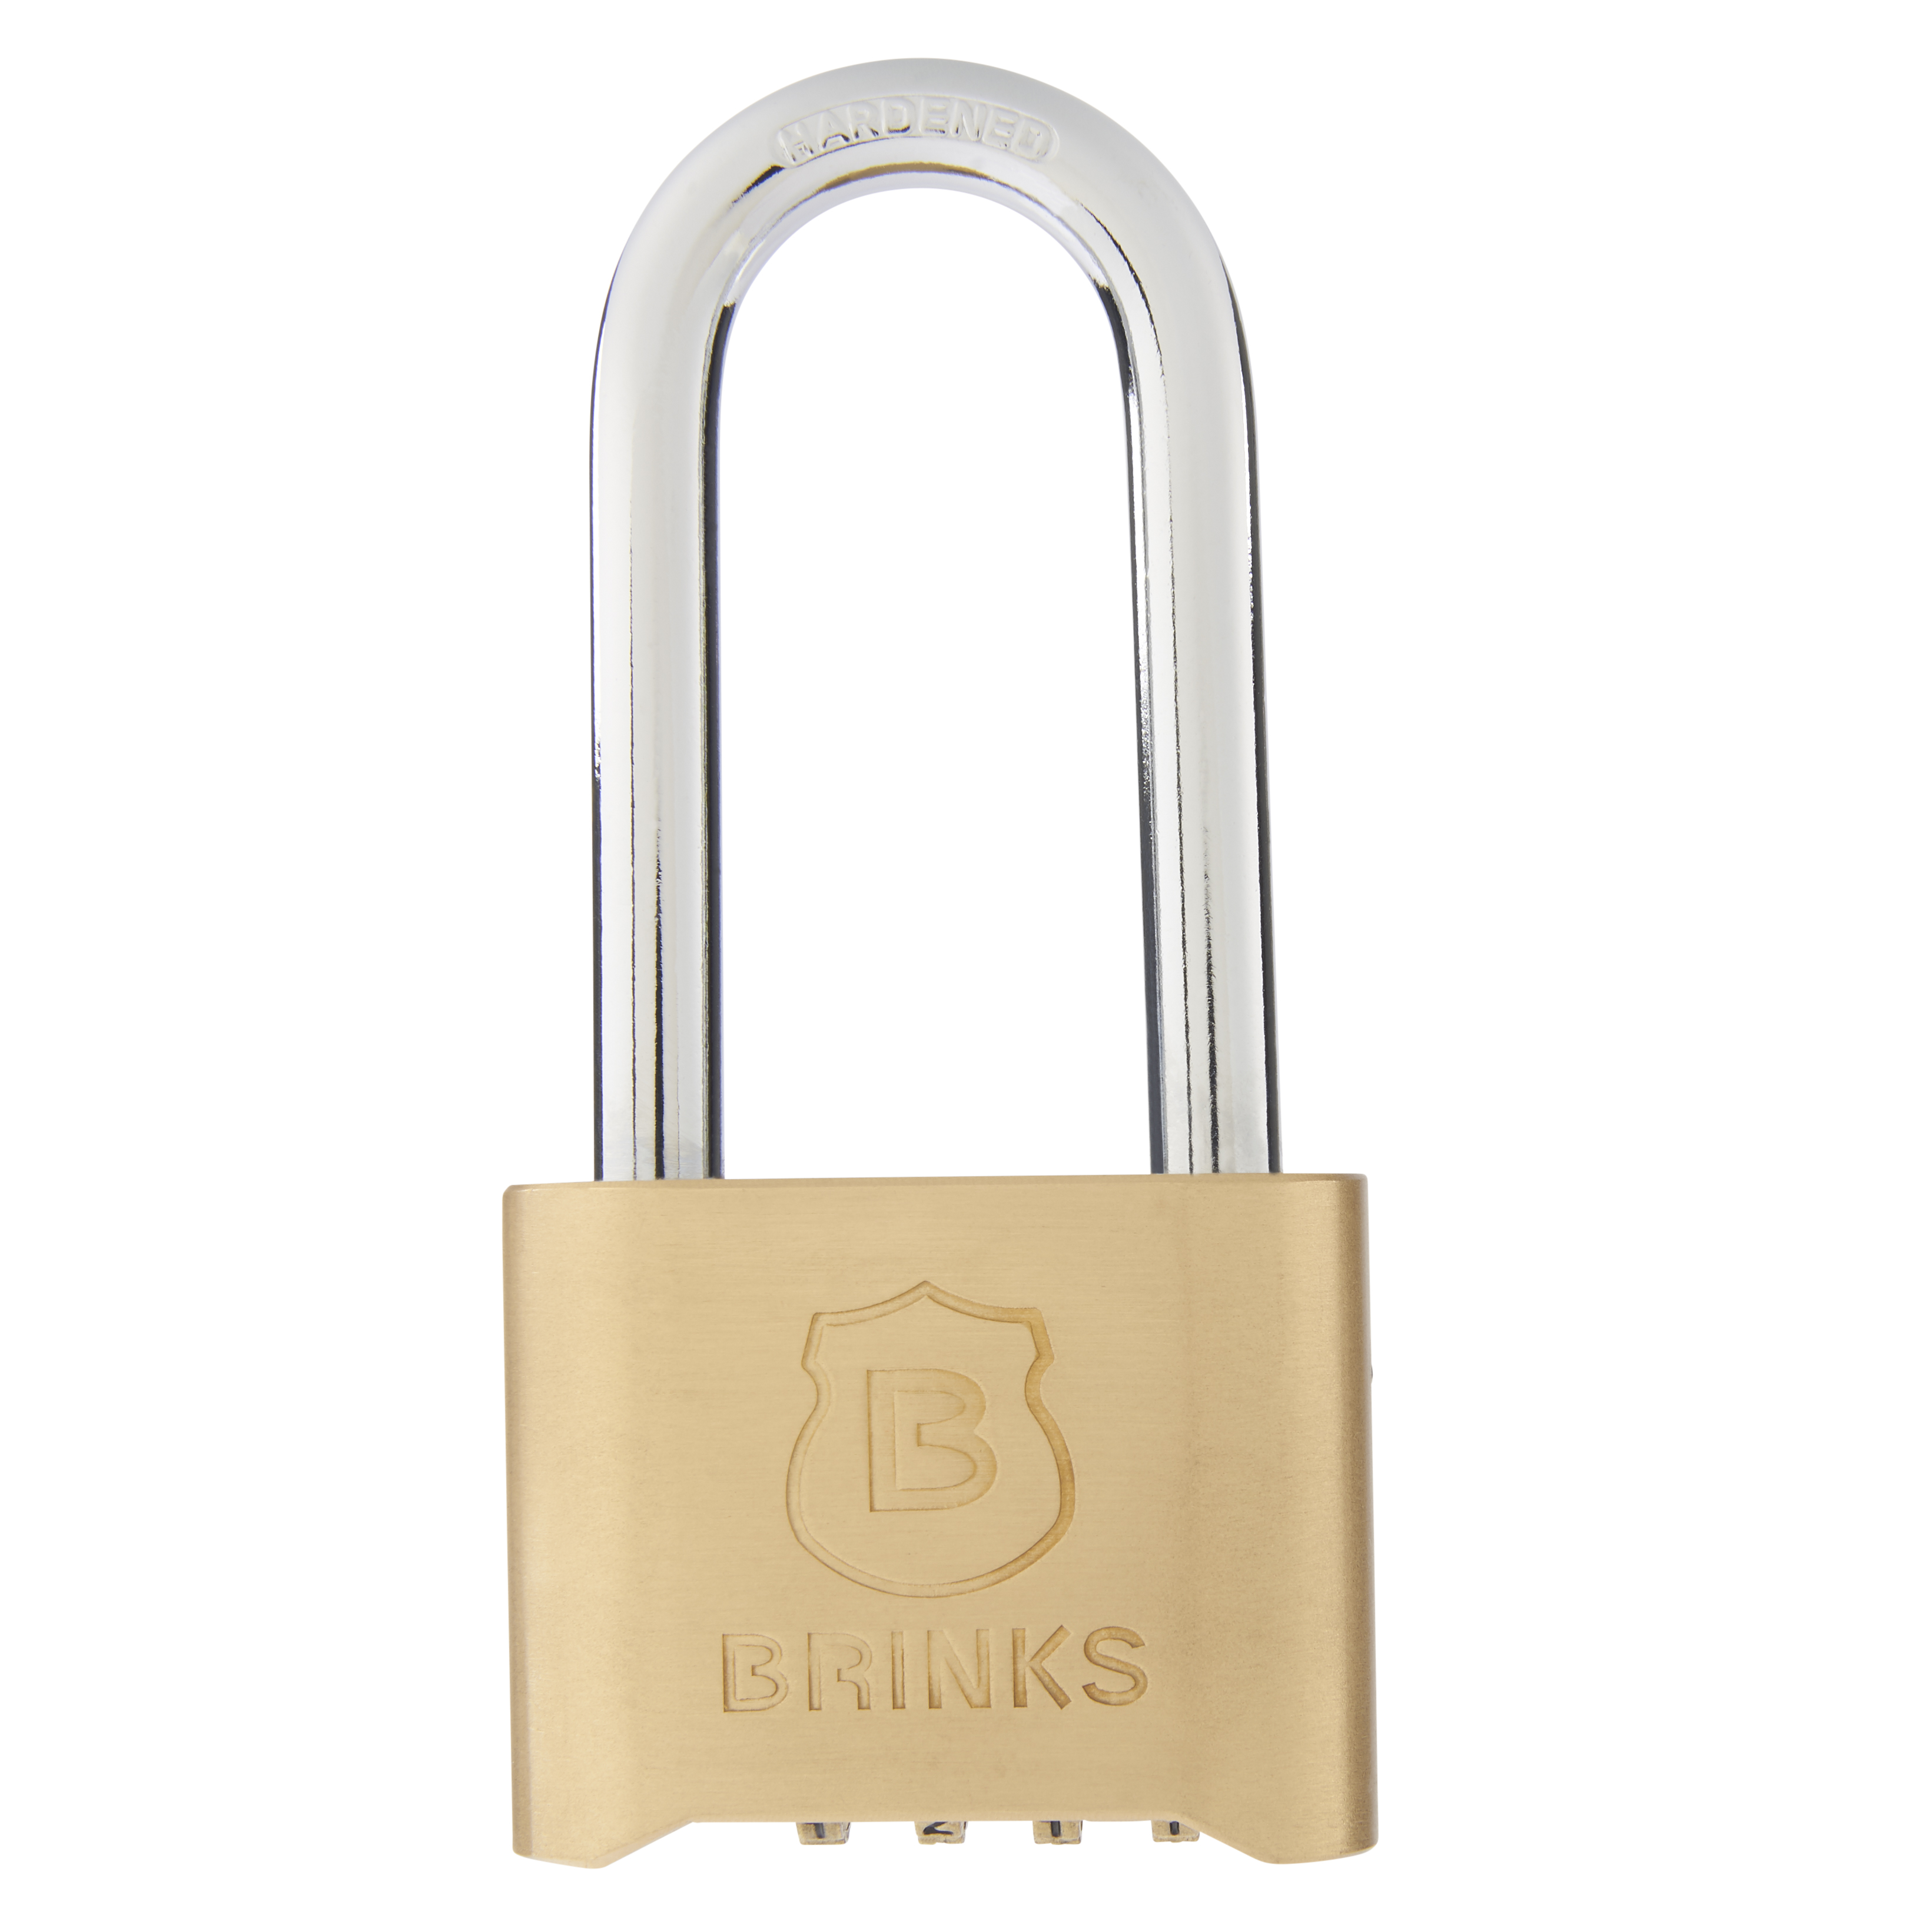 Brinks Solid Brass 50mm Resettable Combination Padlock with 2in Shackle - image 1 of 6